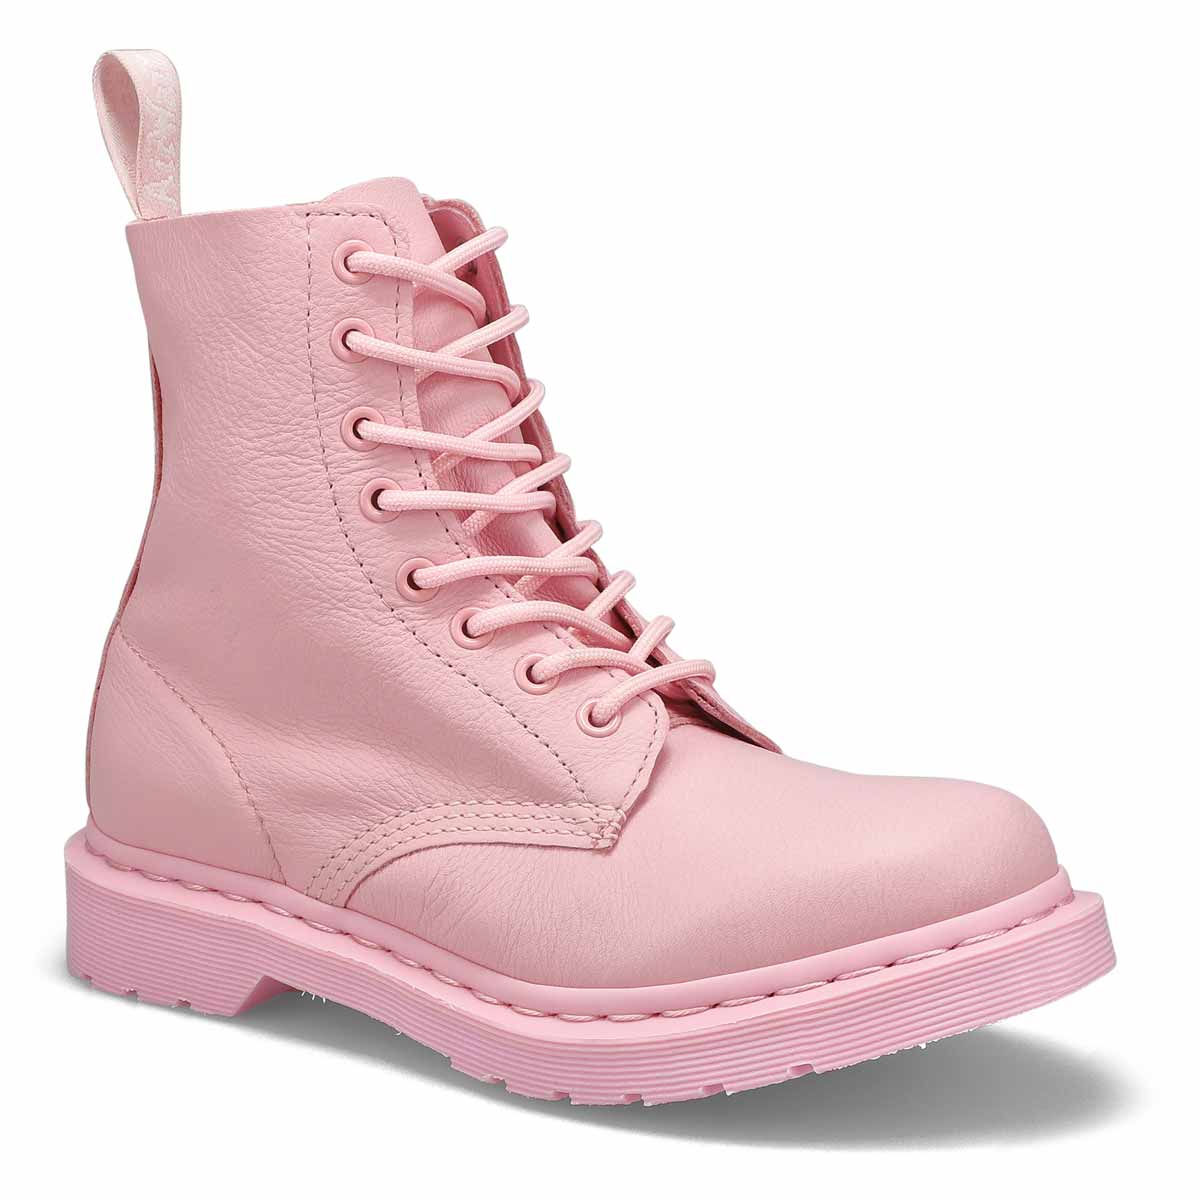 Women's Pascal 1460 Boot - Pink/Pink